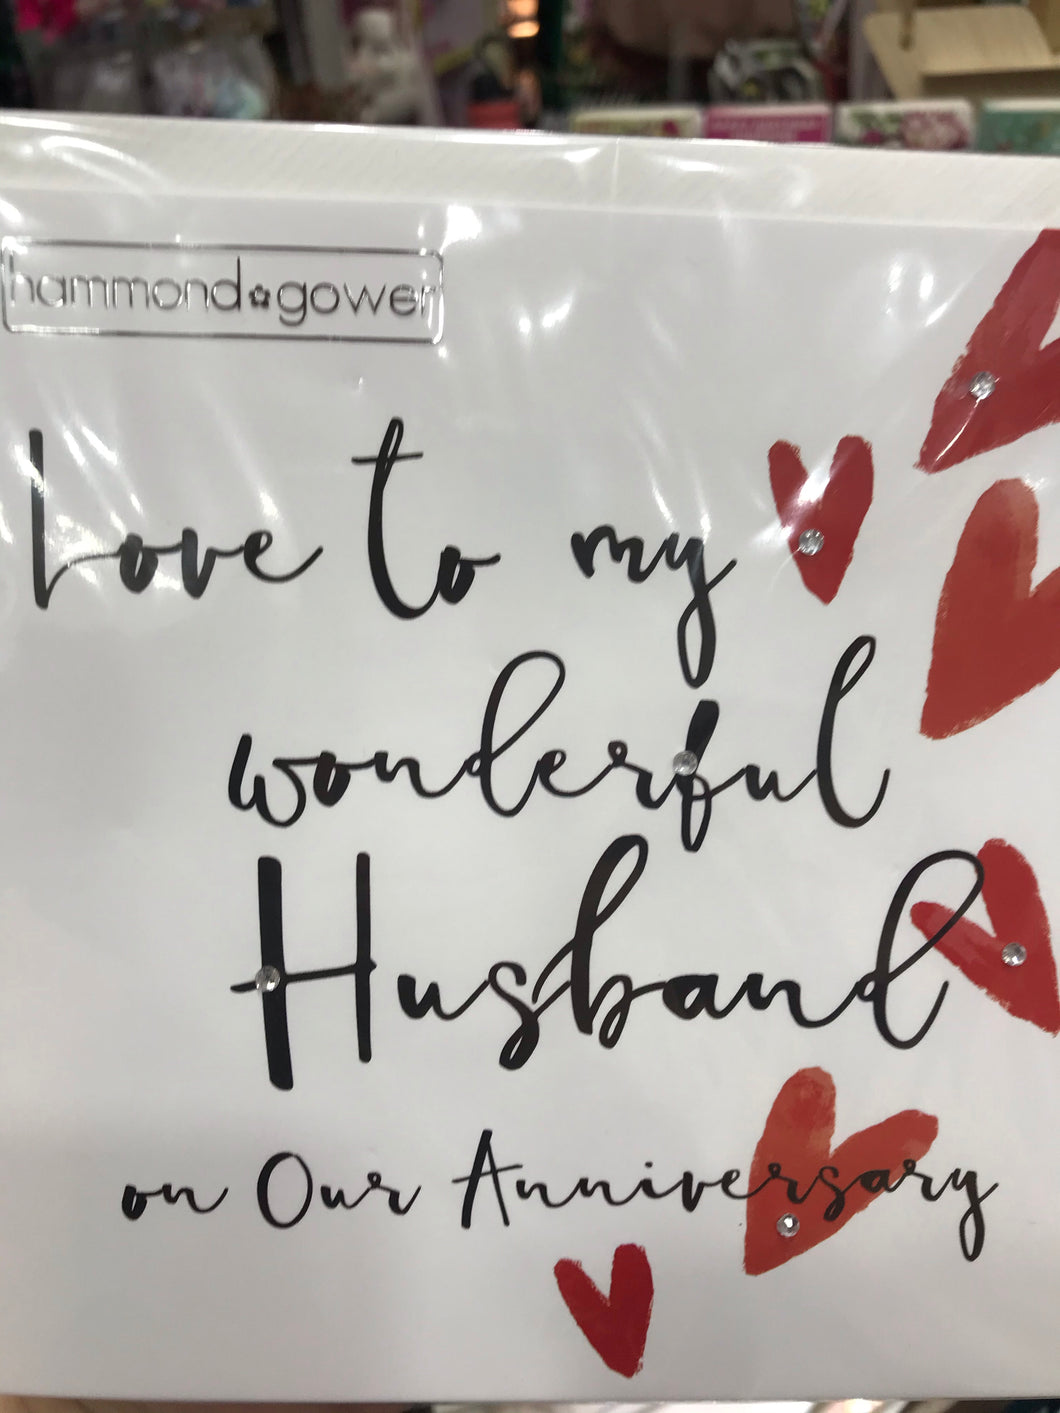 Love to my wonderful husband on our anniversary card